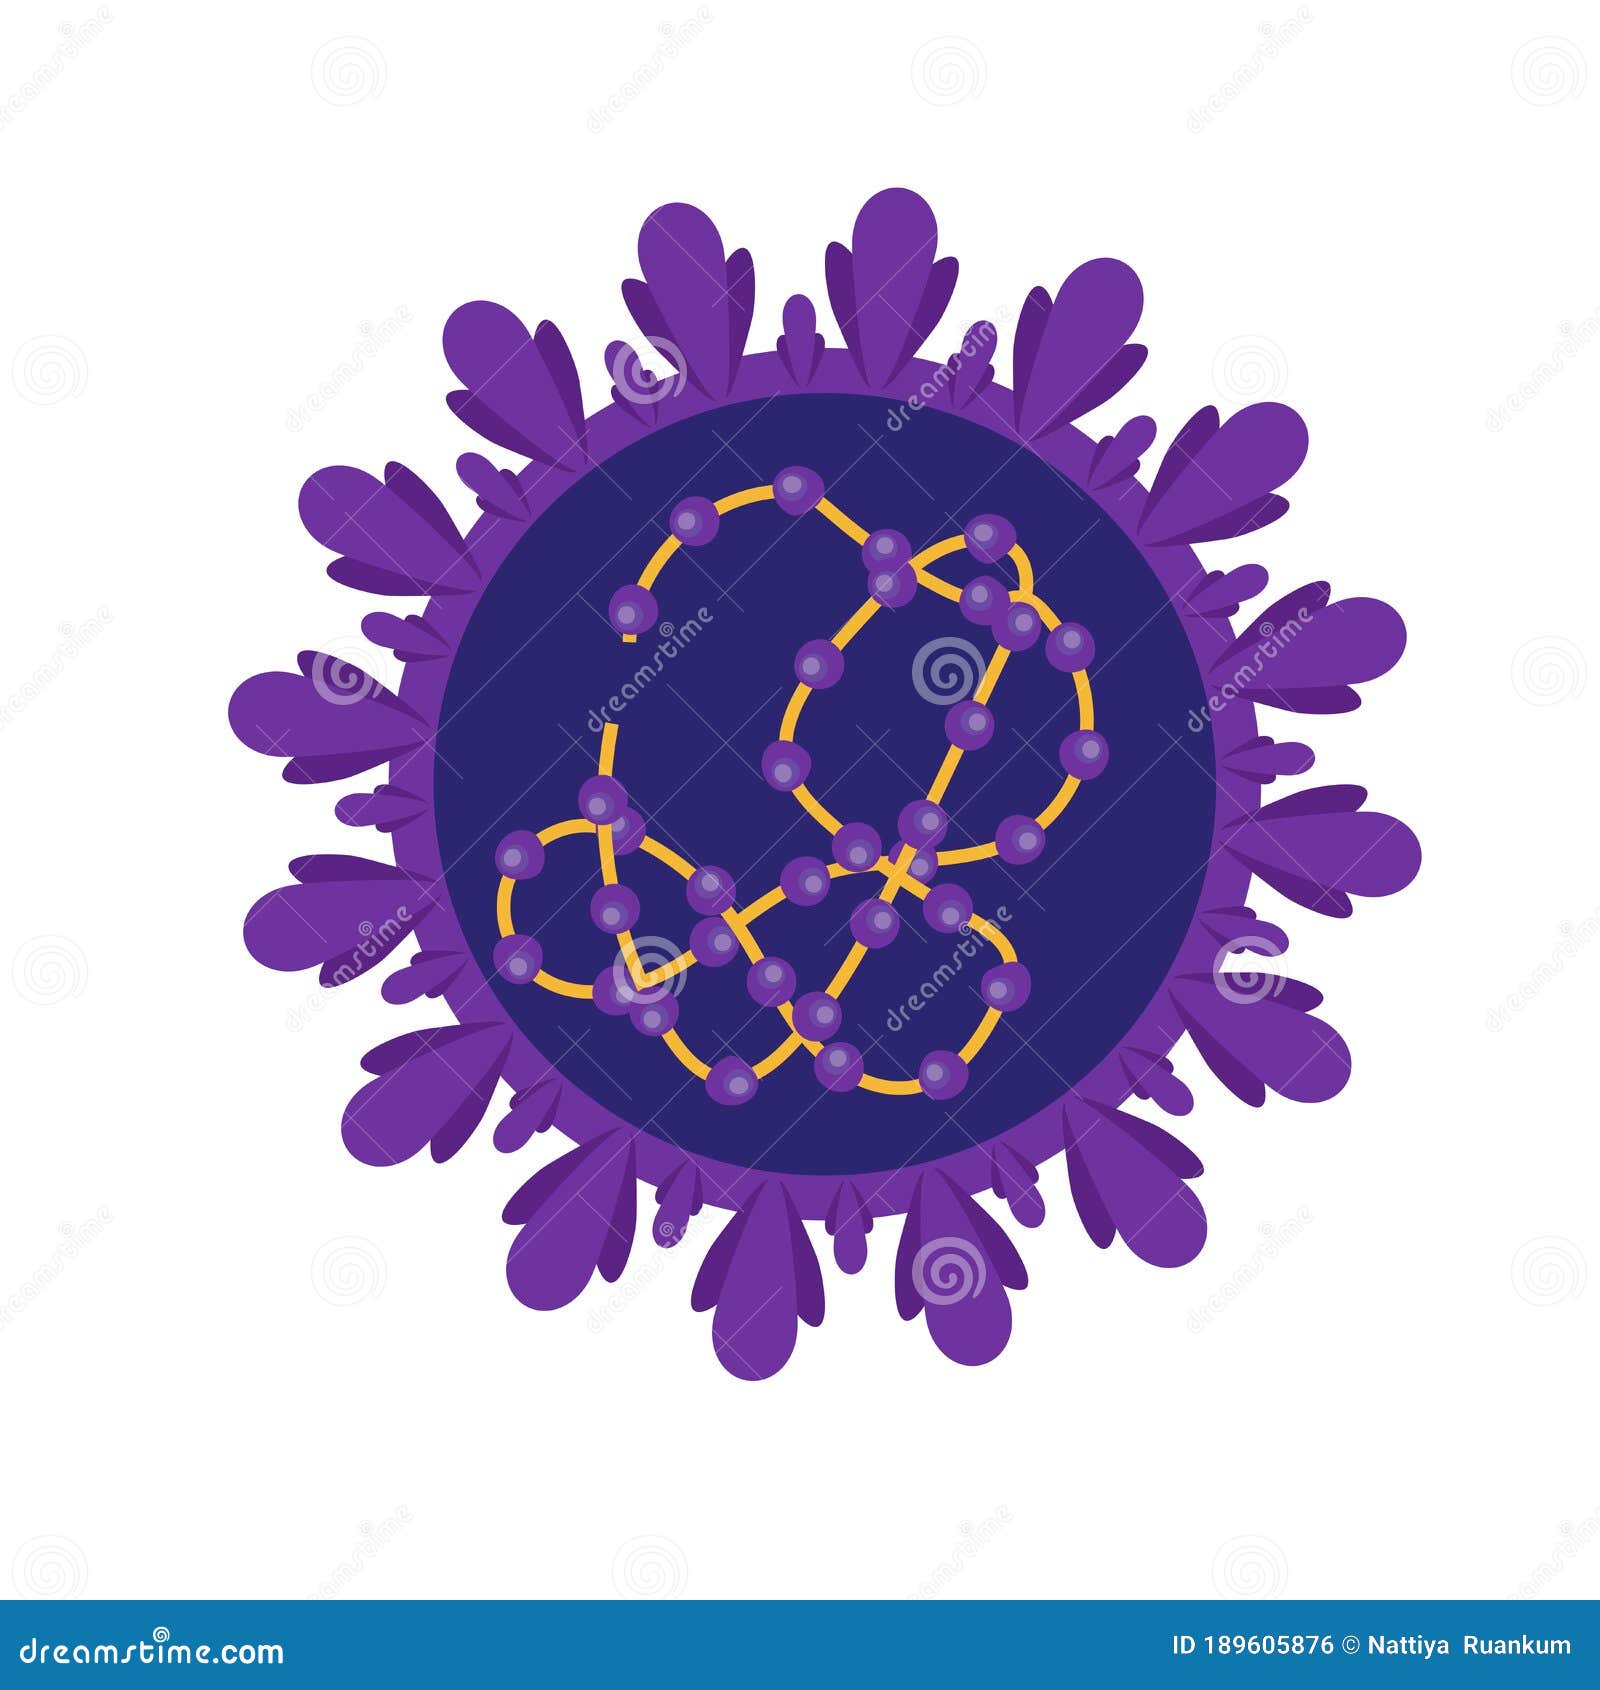 coronavirus cell structures and anatomy. labeled with morphology of proteins, ribosomes, rna, and cell envelope, cover-19